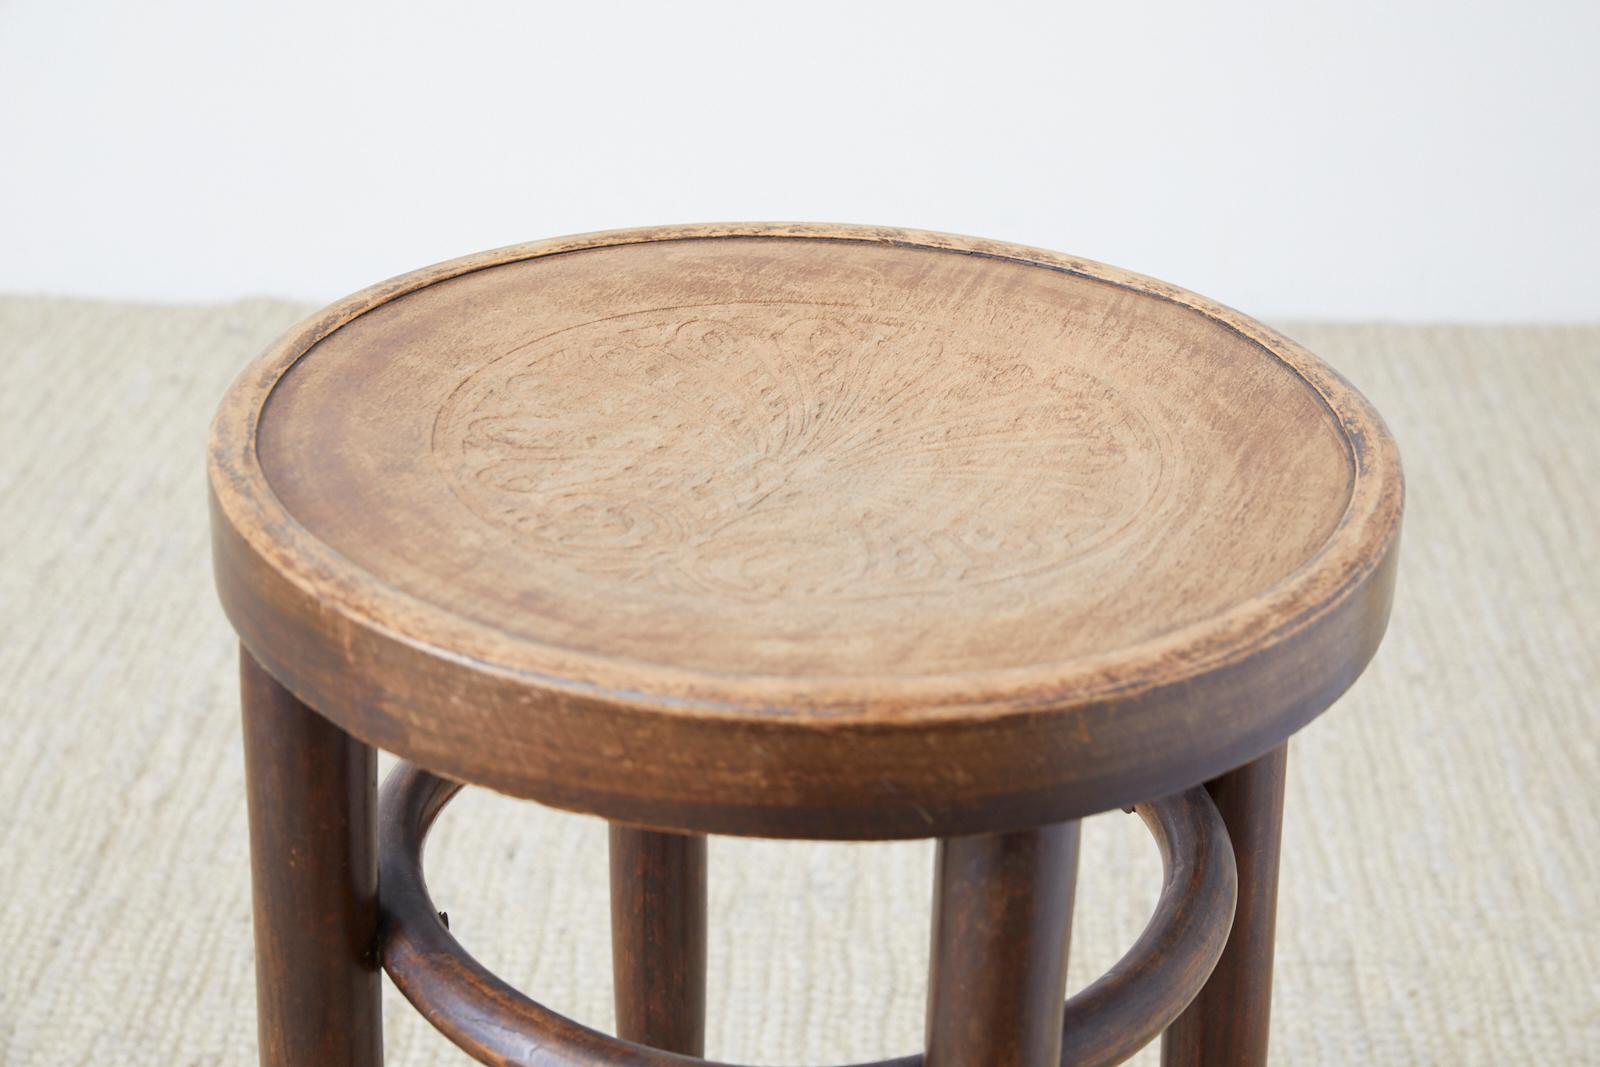 Round wood bentwood stool attributed to Thonet. Features an embossed palmette design on top.